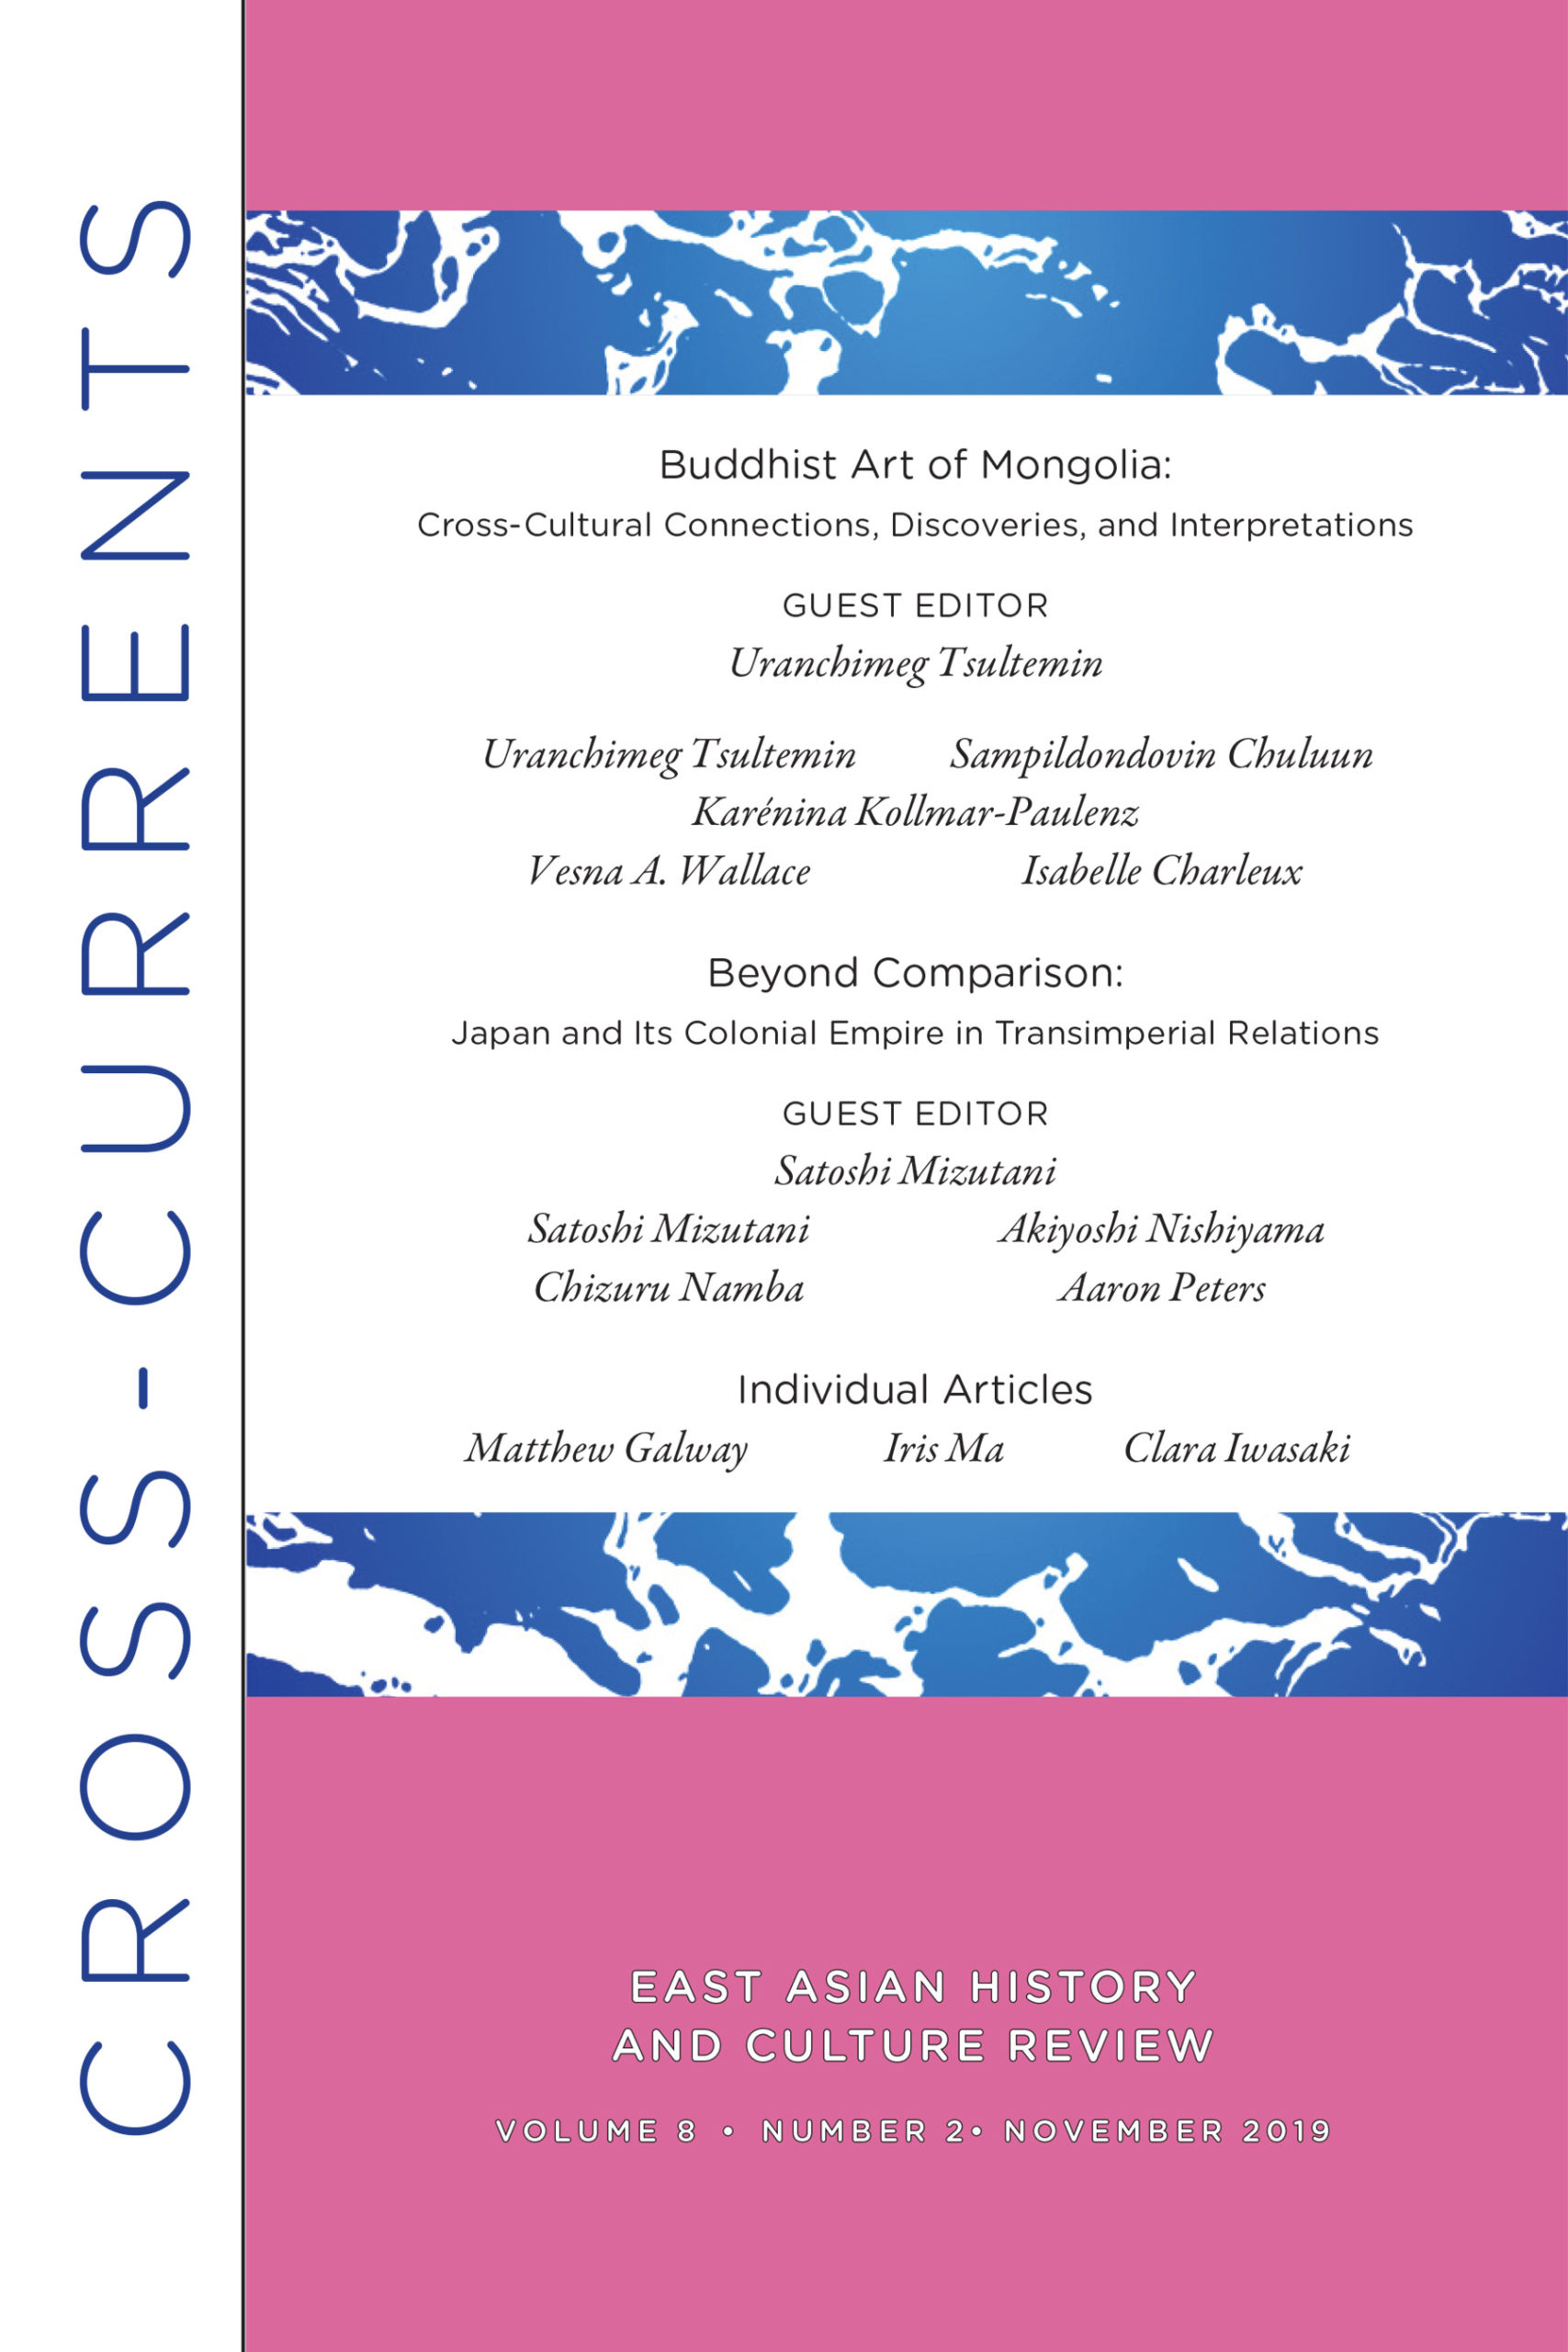 Cross-Currents – Limited Time Special Offer – 50% Off